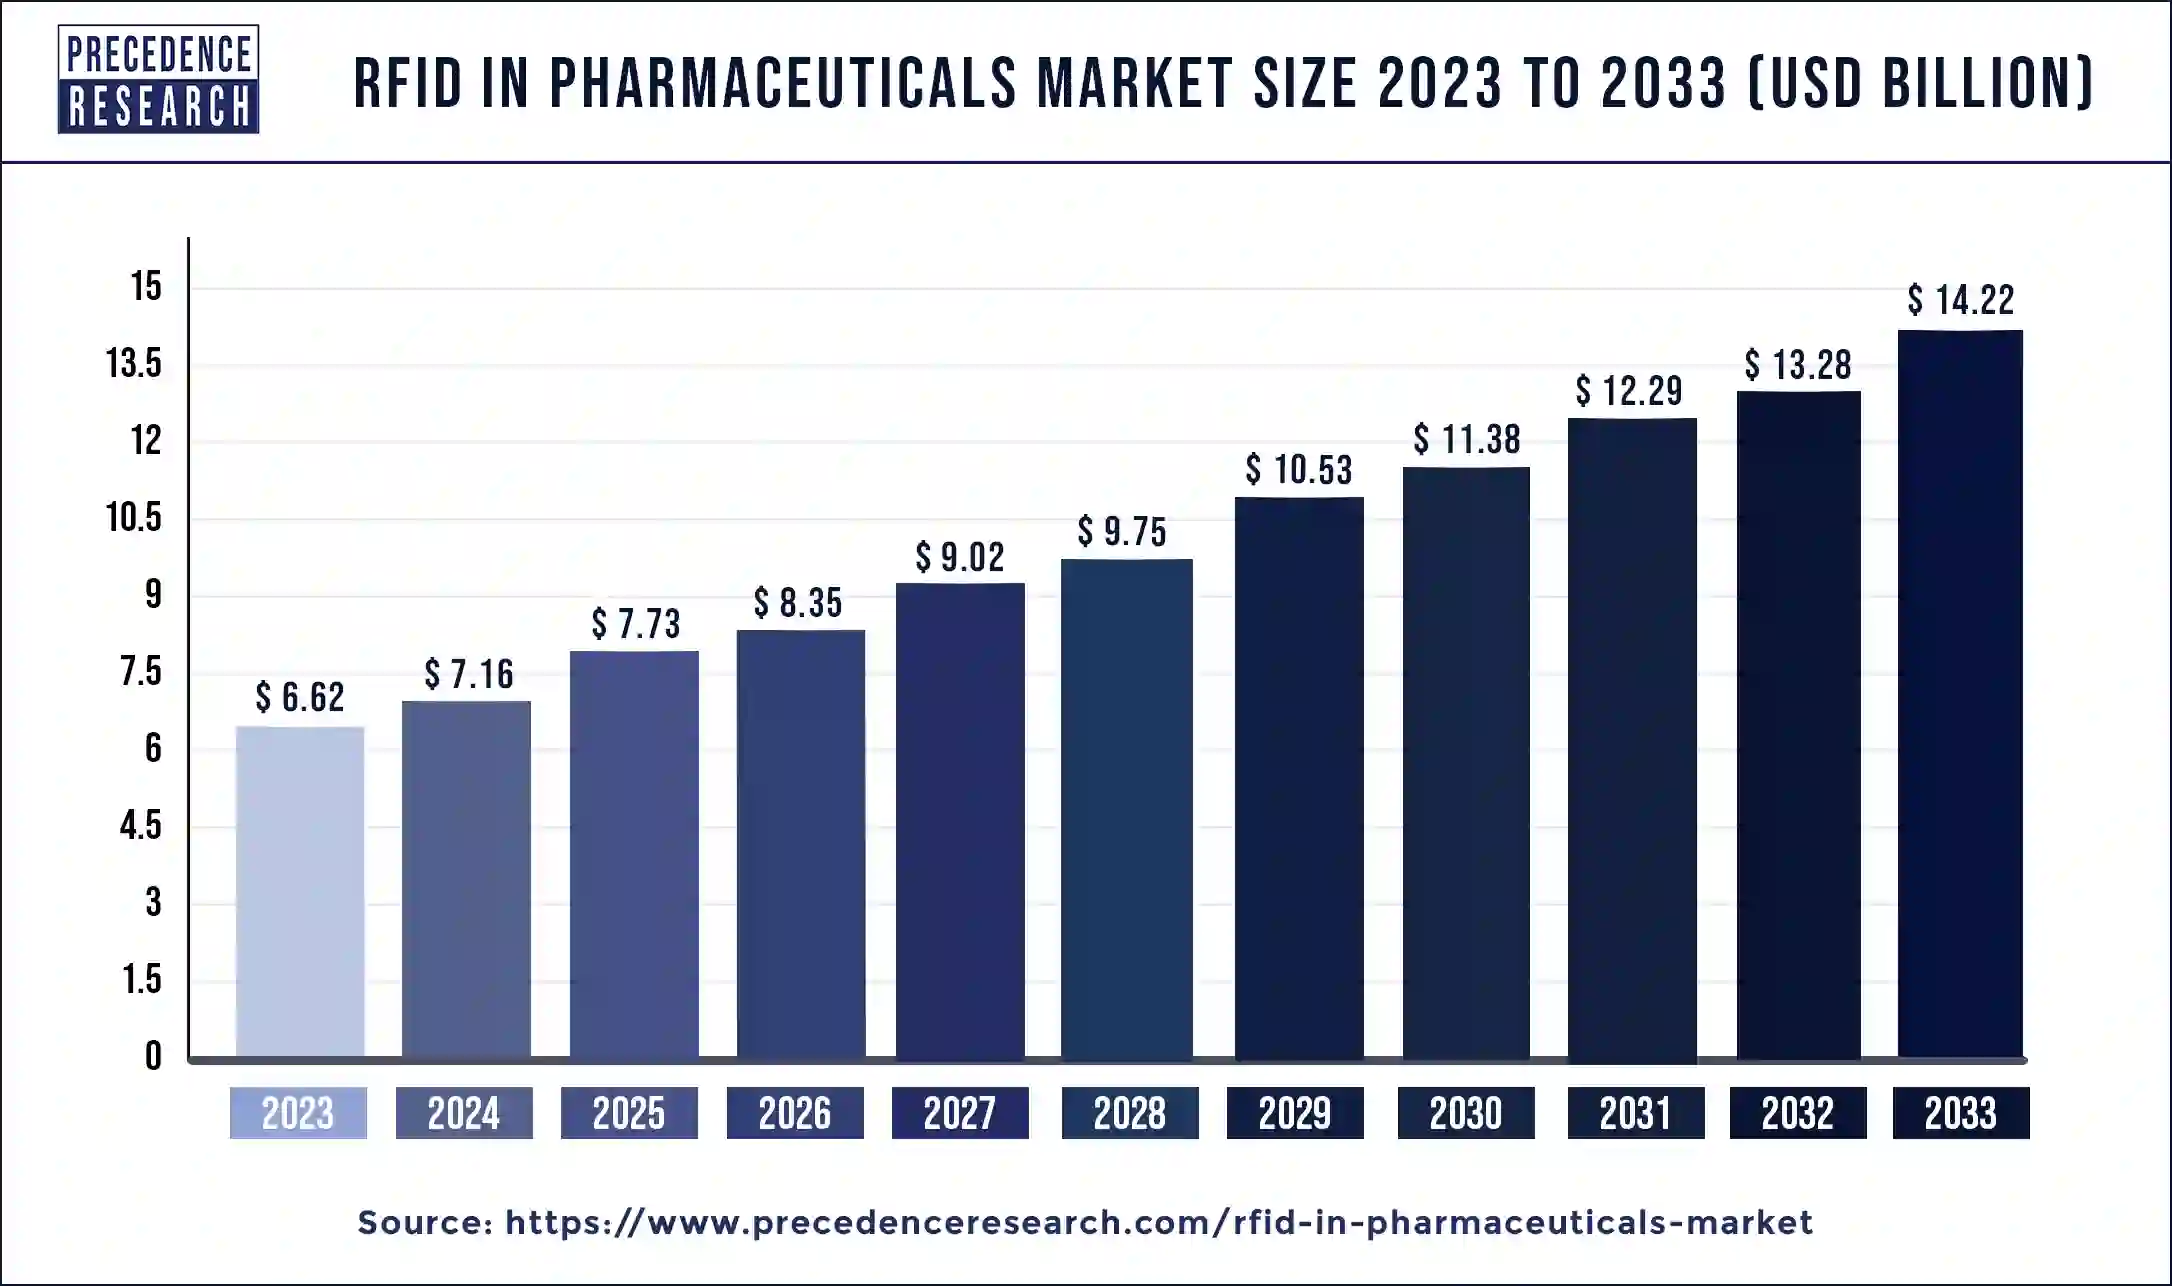 RFID in Pharmaceuticals Market Size 2024 to 2033